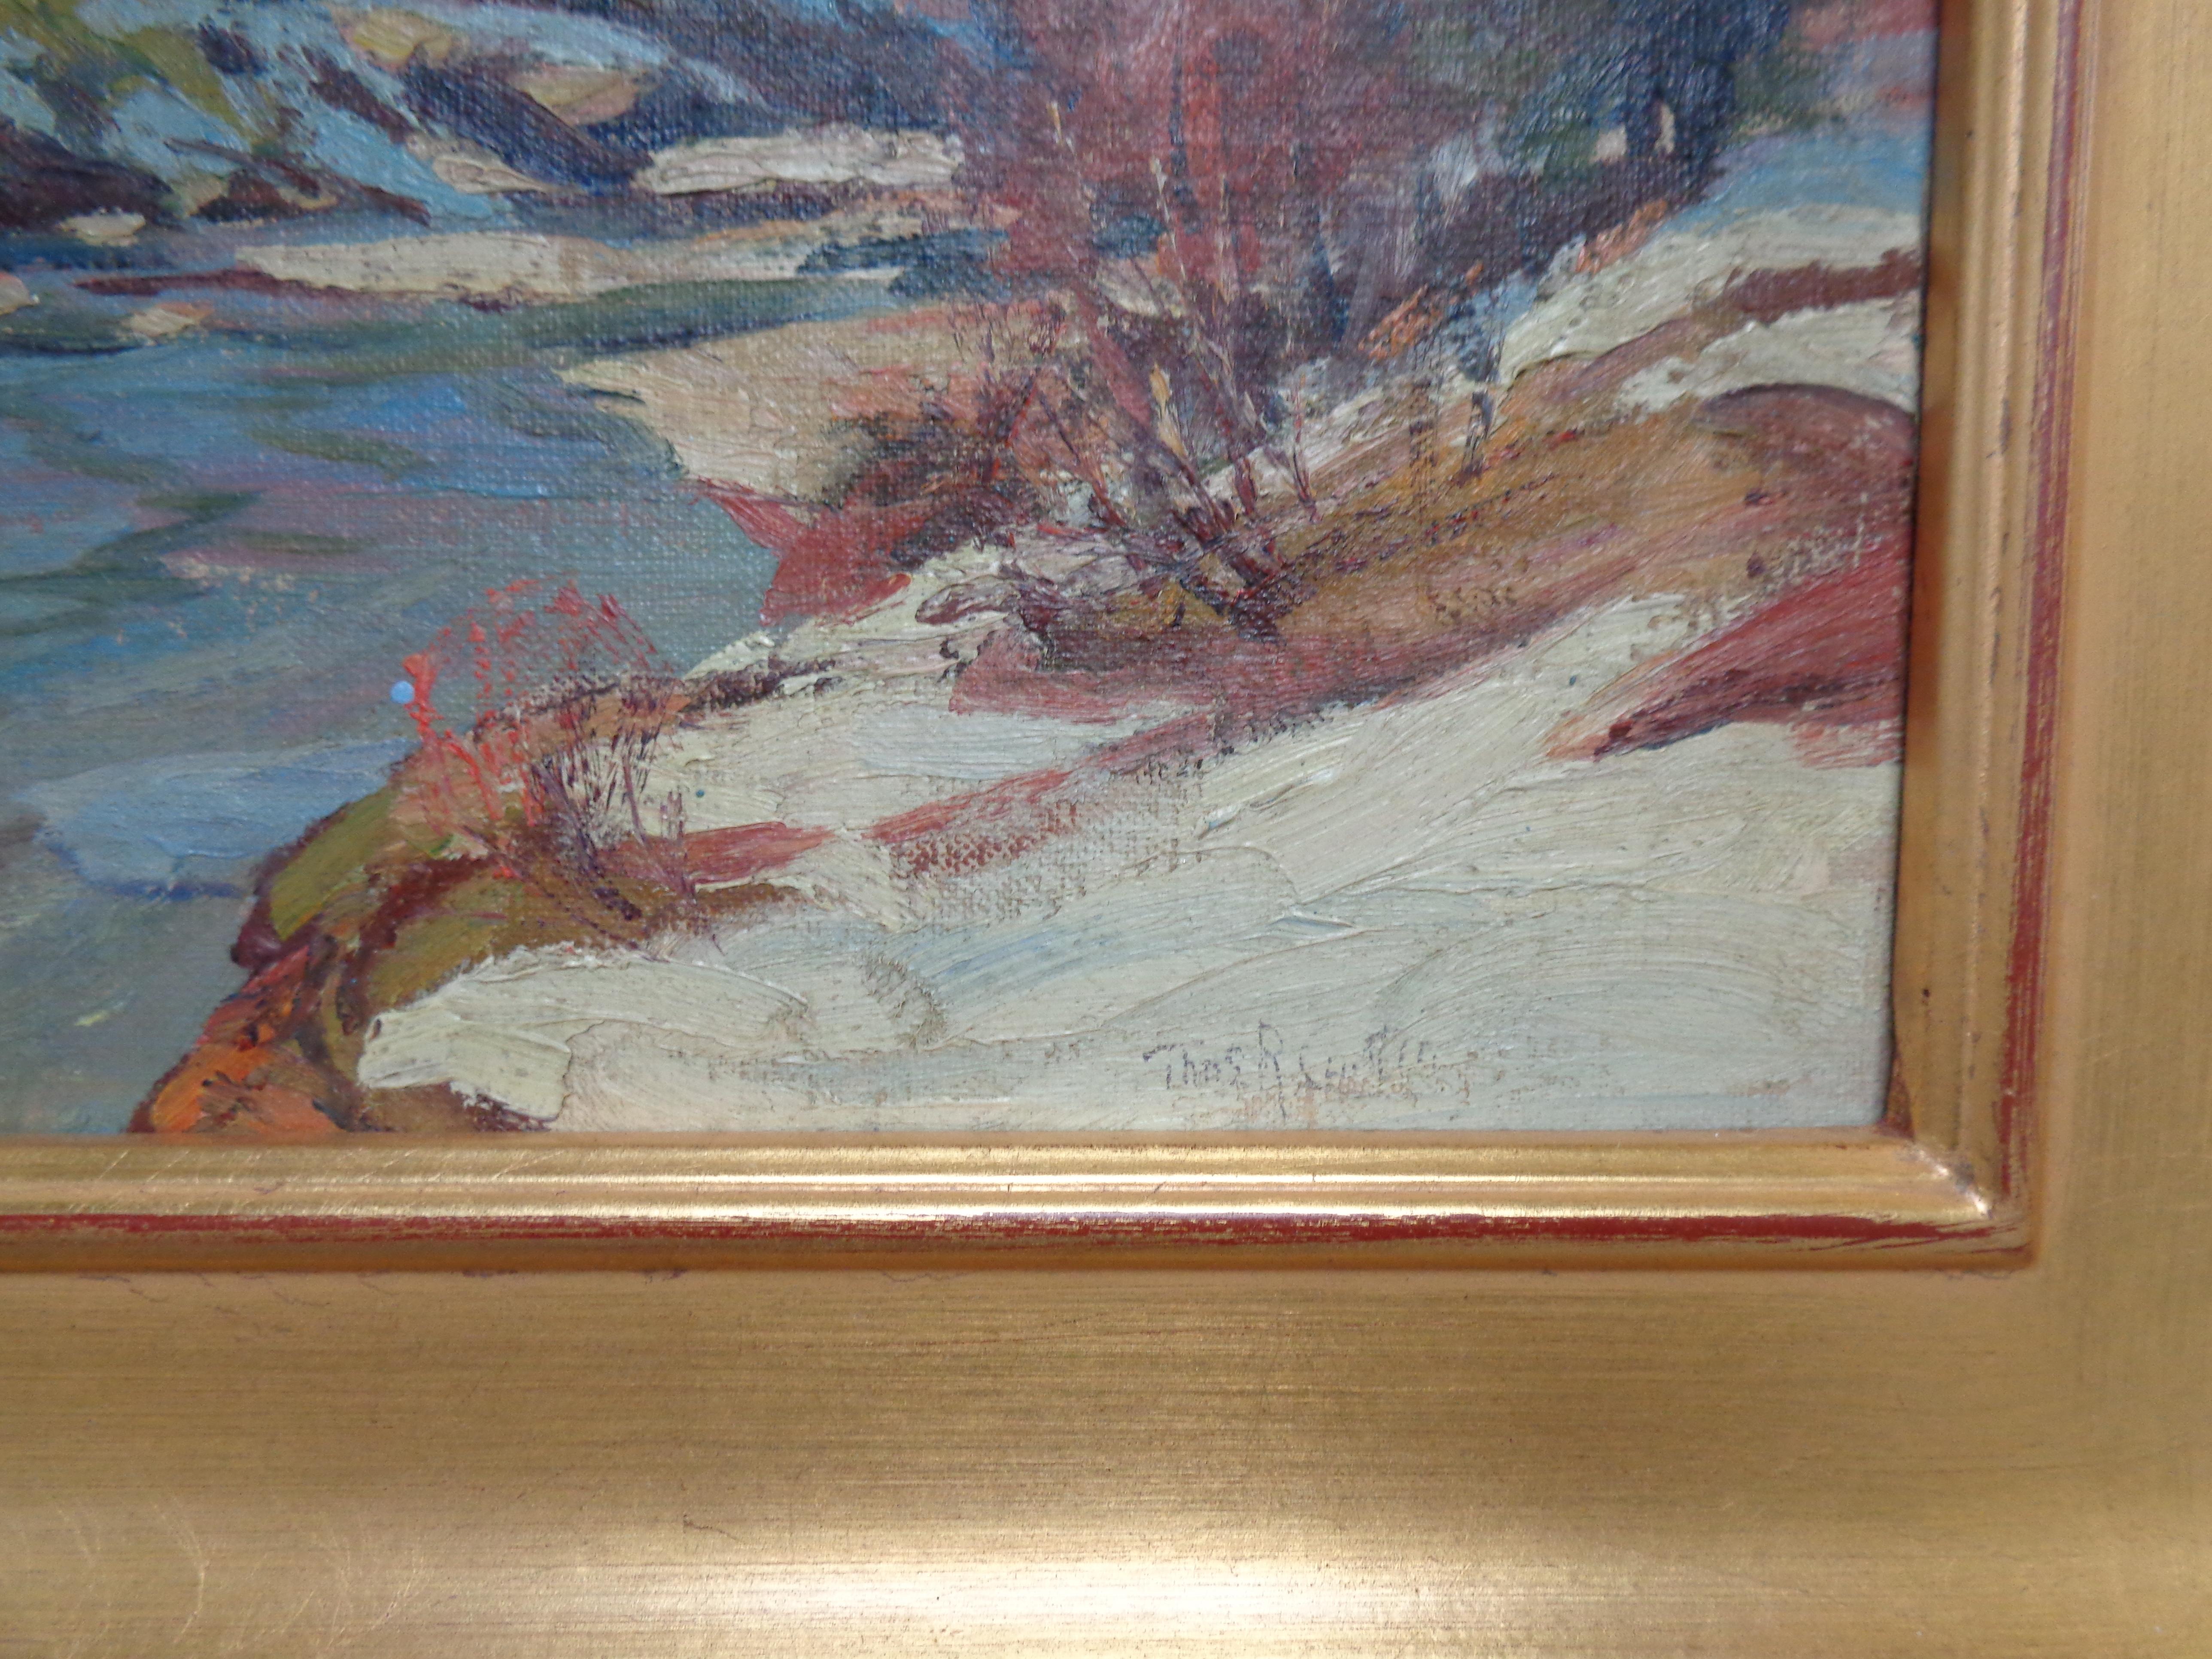 Winter landscape by Thomas Curtin - Painting by Thomas R Curtin